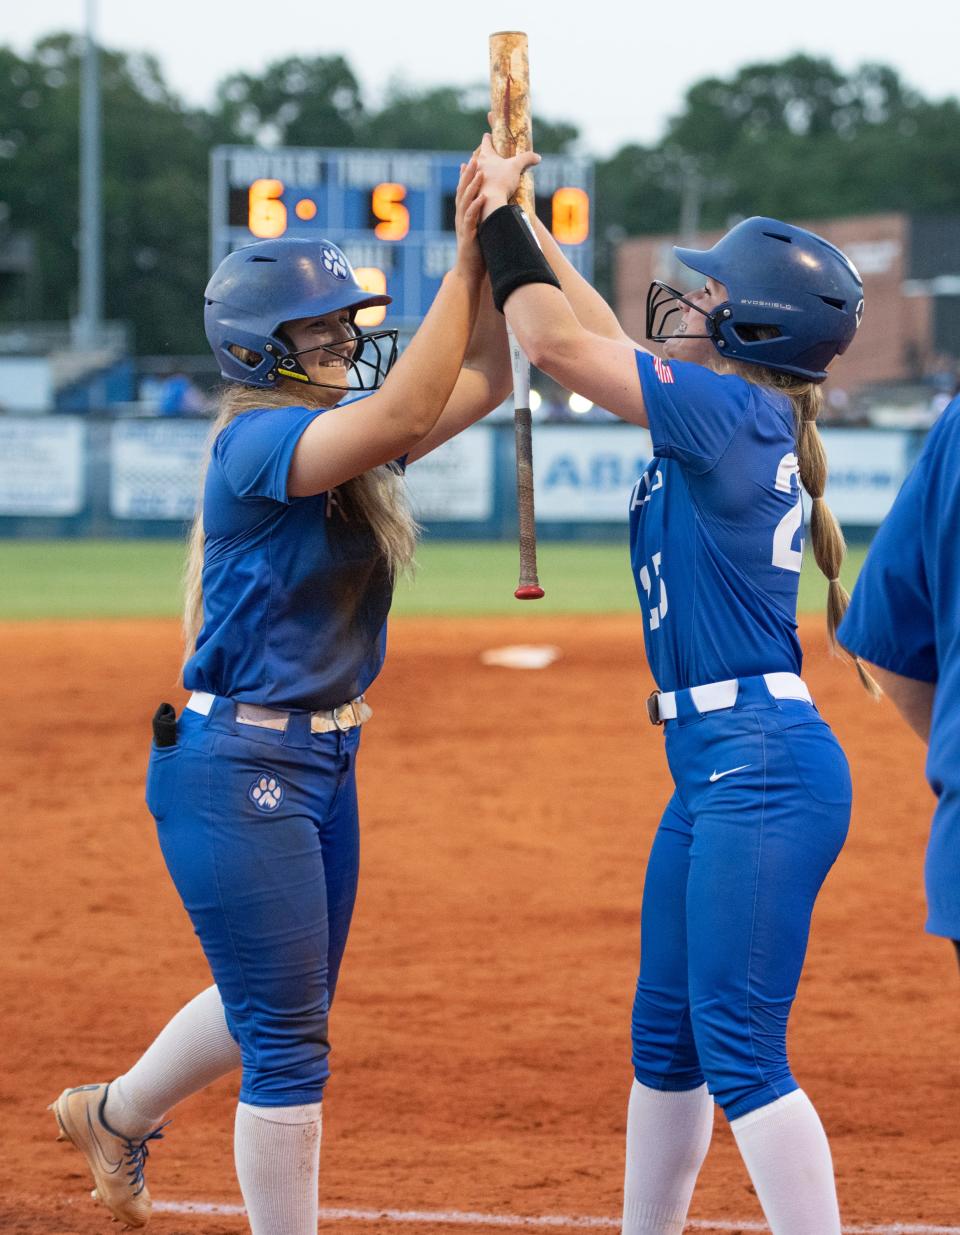 Brooklyn Sorrells (12) and Kaylee Gilbreath (23) celebrate taking a 6-0 lead during the Northview vs Jay 1A regional semifinal playoff softball game at Jay High School on Thursday, May 12, 2022.